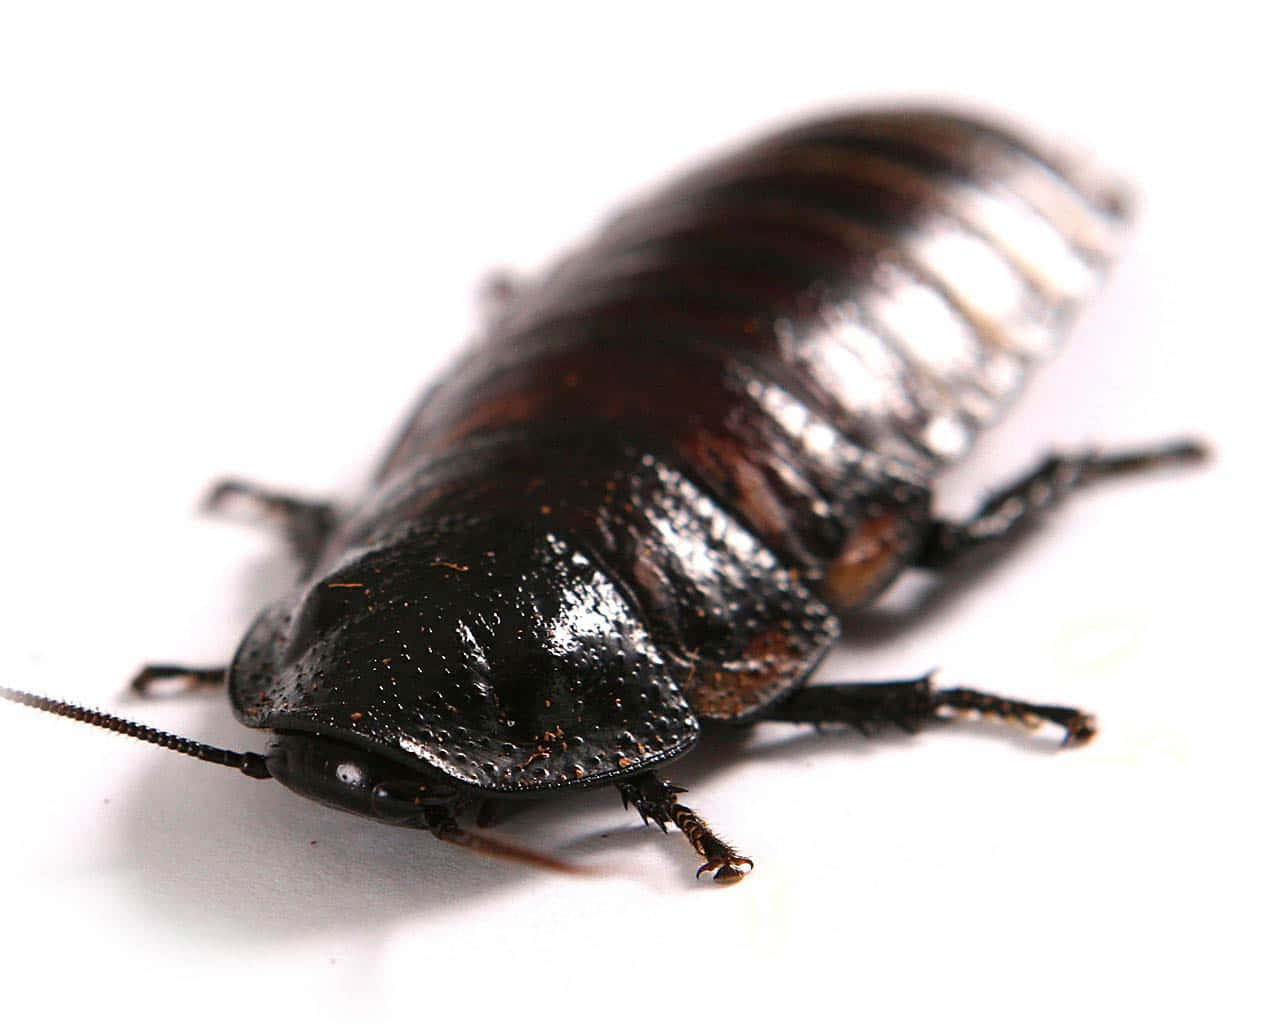 A close up of a common American cockroach